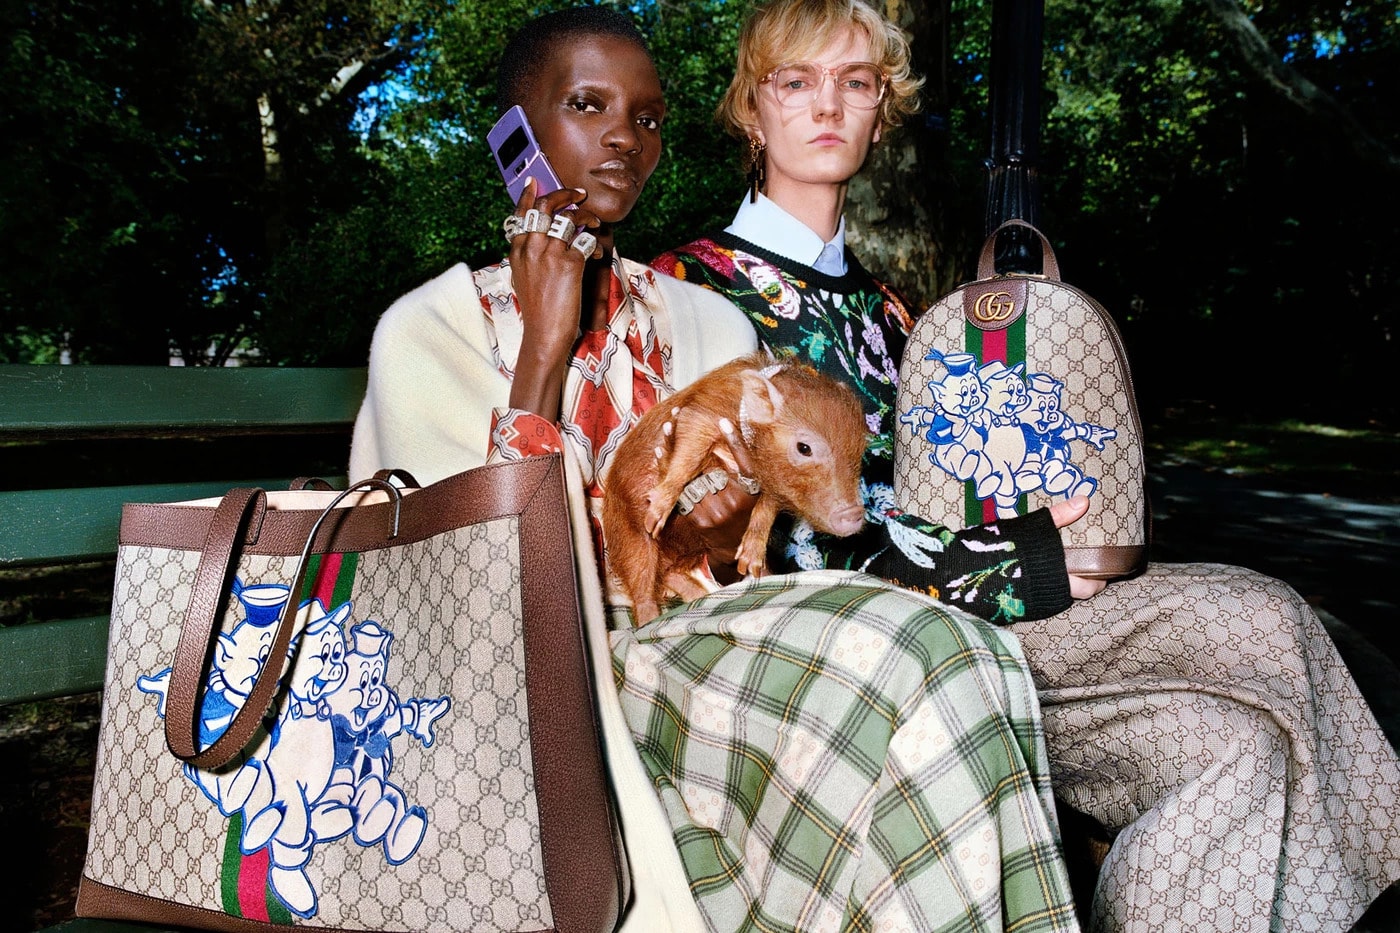 Gucci Is Still the World's Hottest Brand, Says Lyst